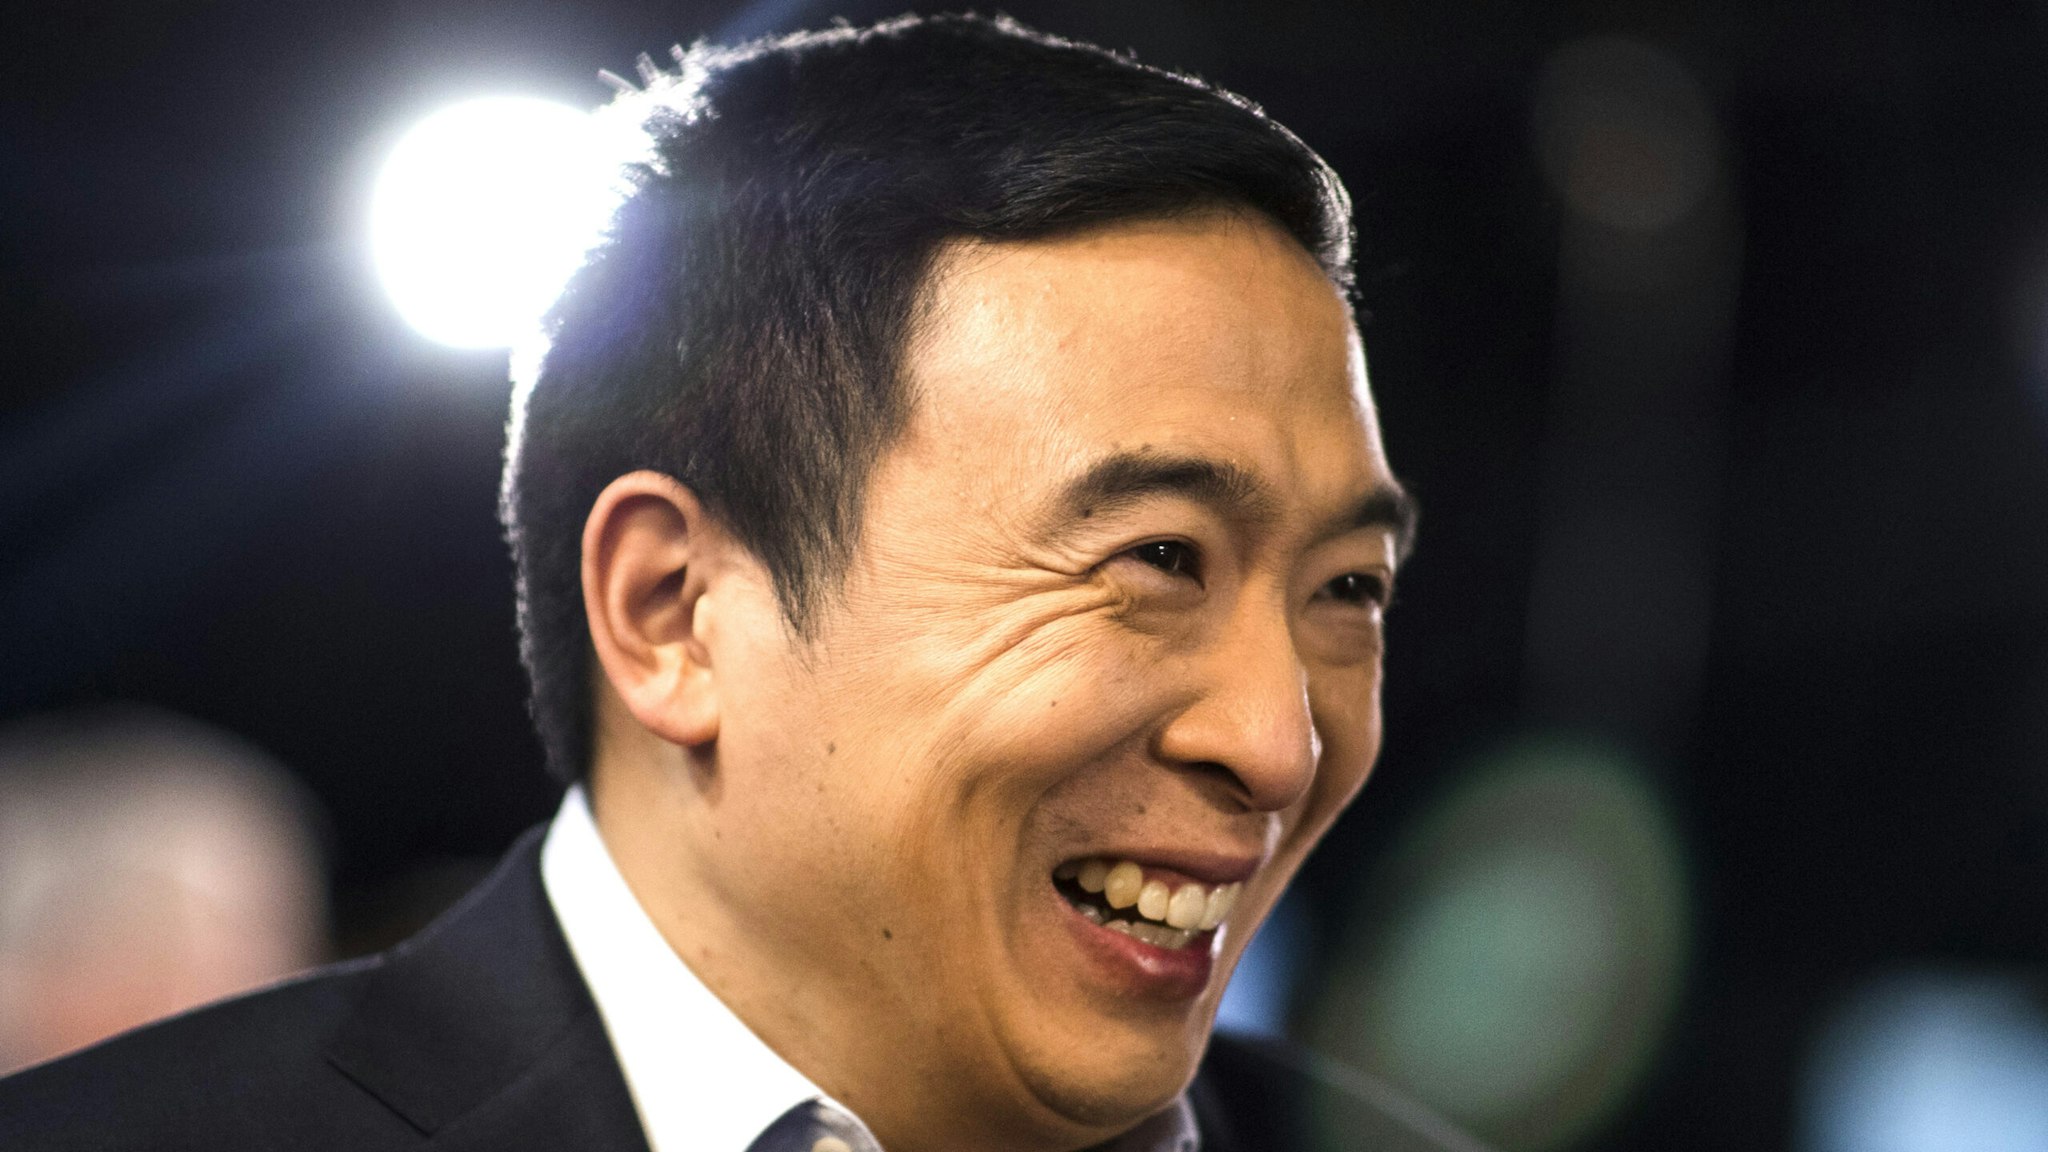 Andrew Yang, founder of Venture for America and 2020 Democratic presidential candidate, reacts as he stands in the spin room following the Democratic presidential debate at Saint Anselm College in Manchester, New Hampshire, U.S., on Friday, Feb. 7, 2020. The New Hampshire debates often mark a turning point in a presidential campaign, as the field of candidates is winnowed and voters begin to pay closer attention.